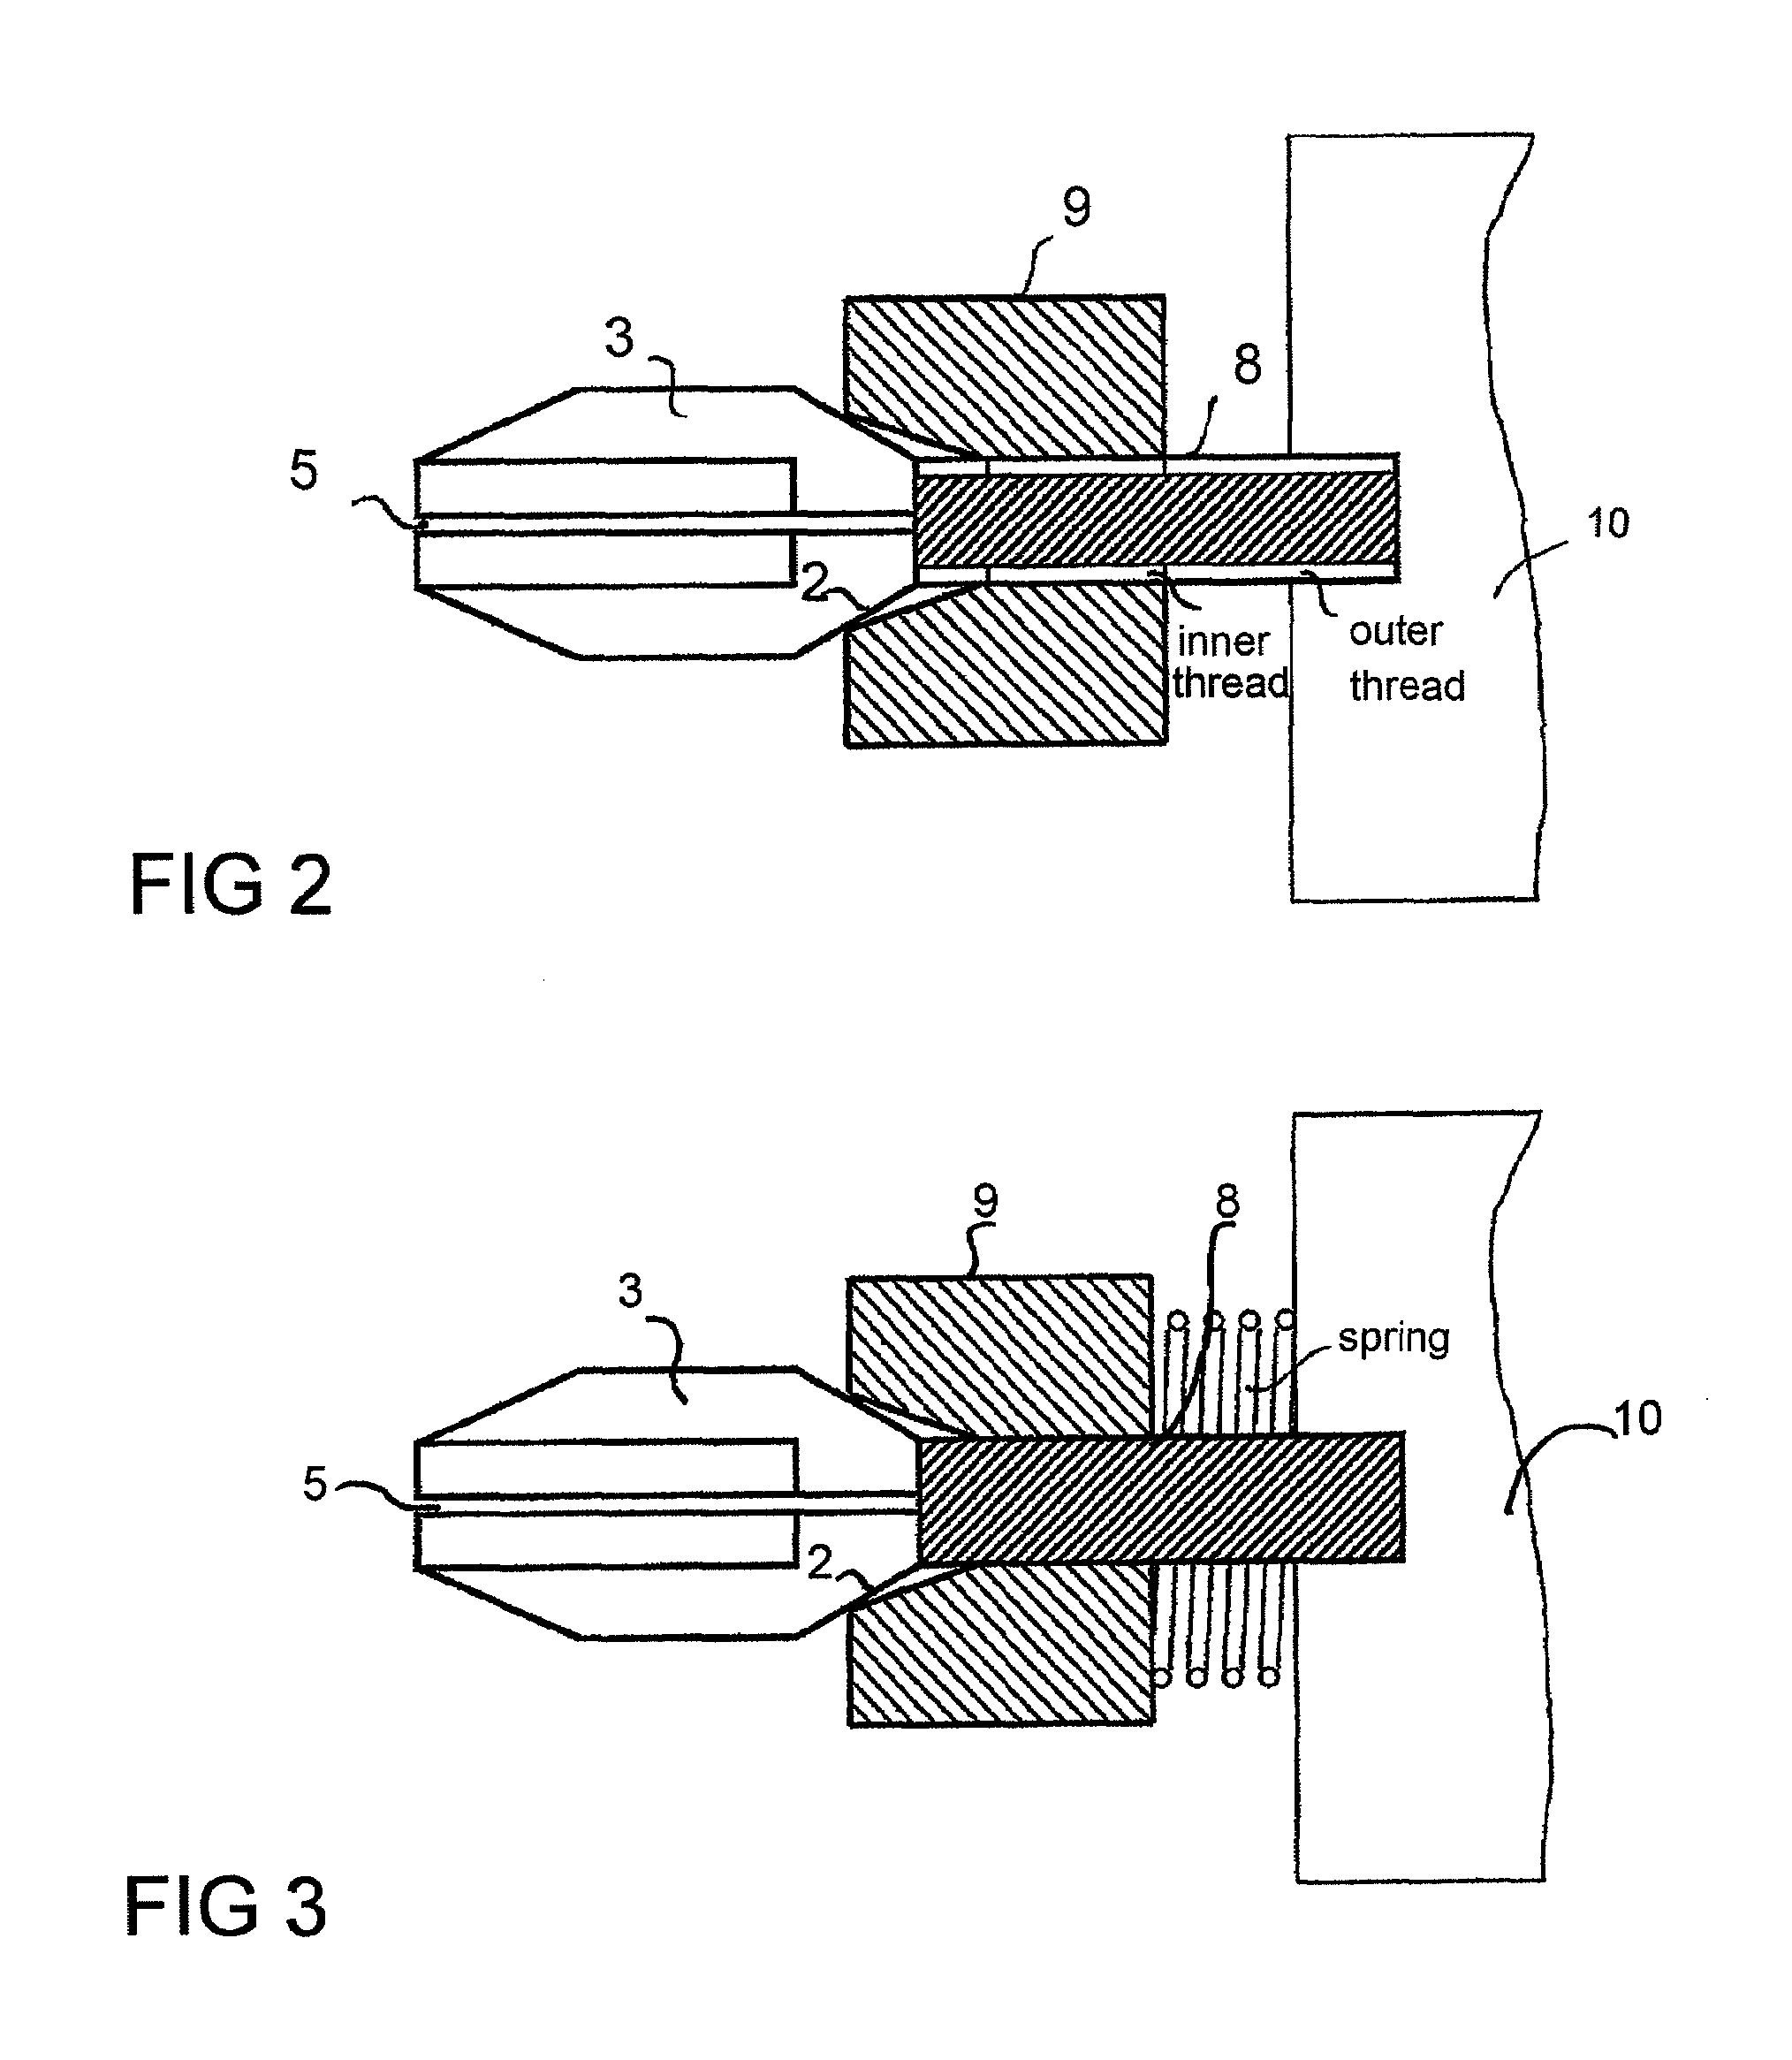 Probe receptacle for mounting a probe for testing semiconductor components, probe holder arm and test apparatus